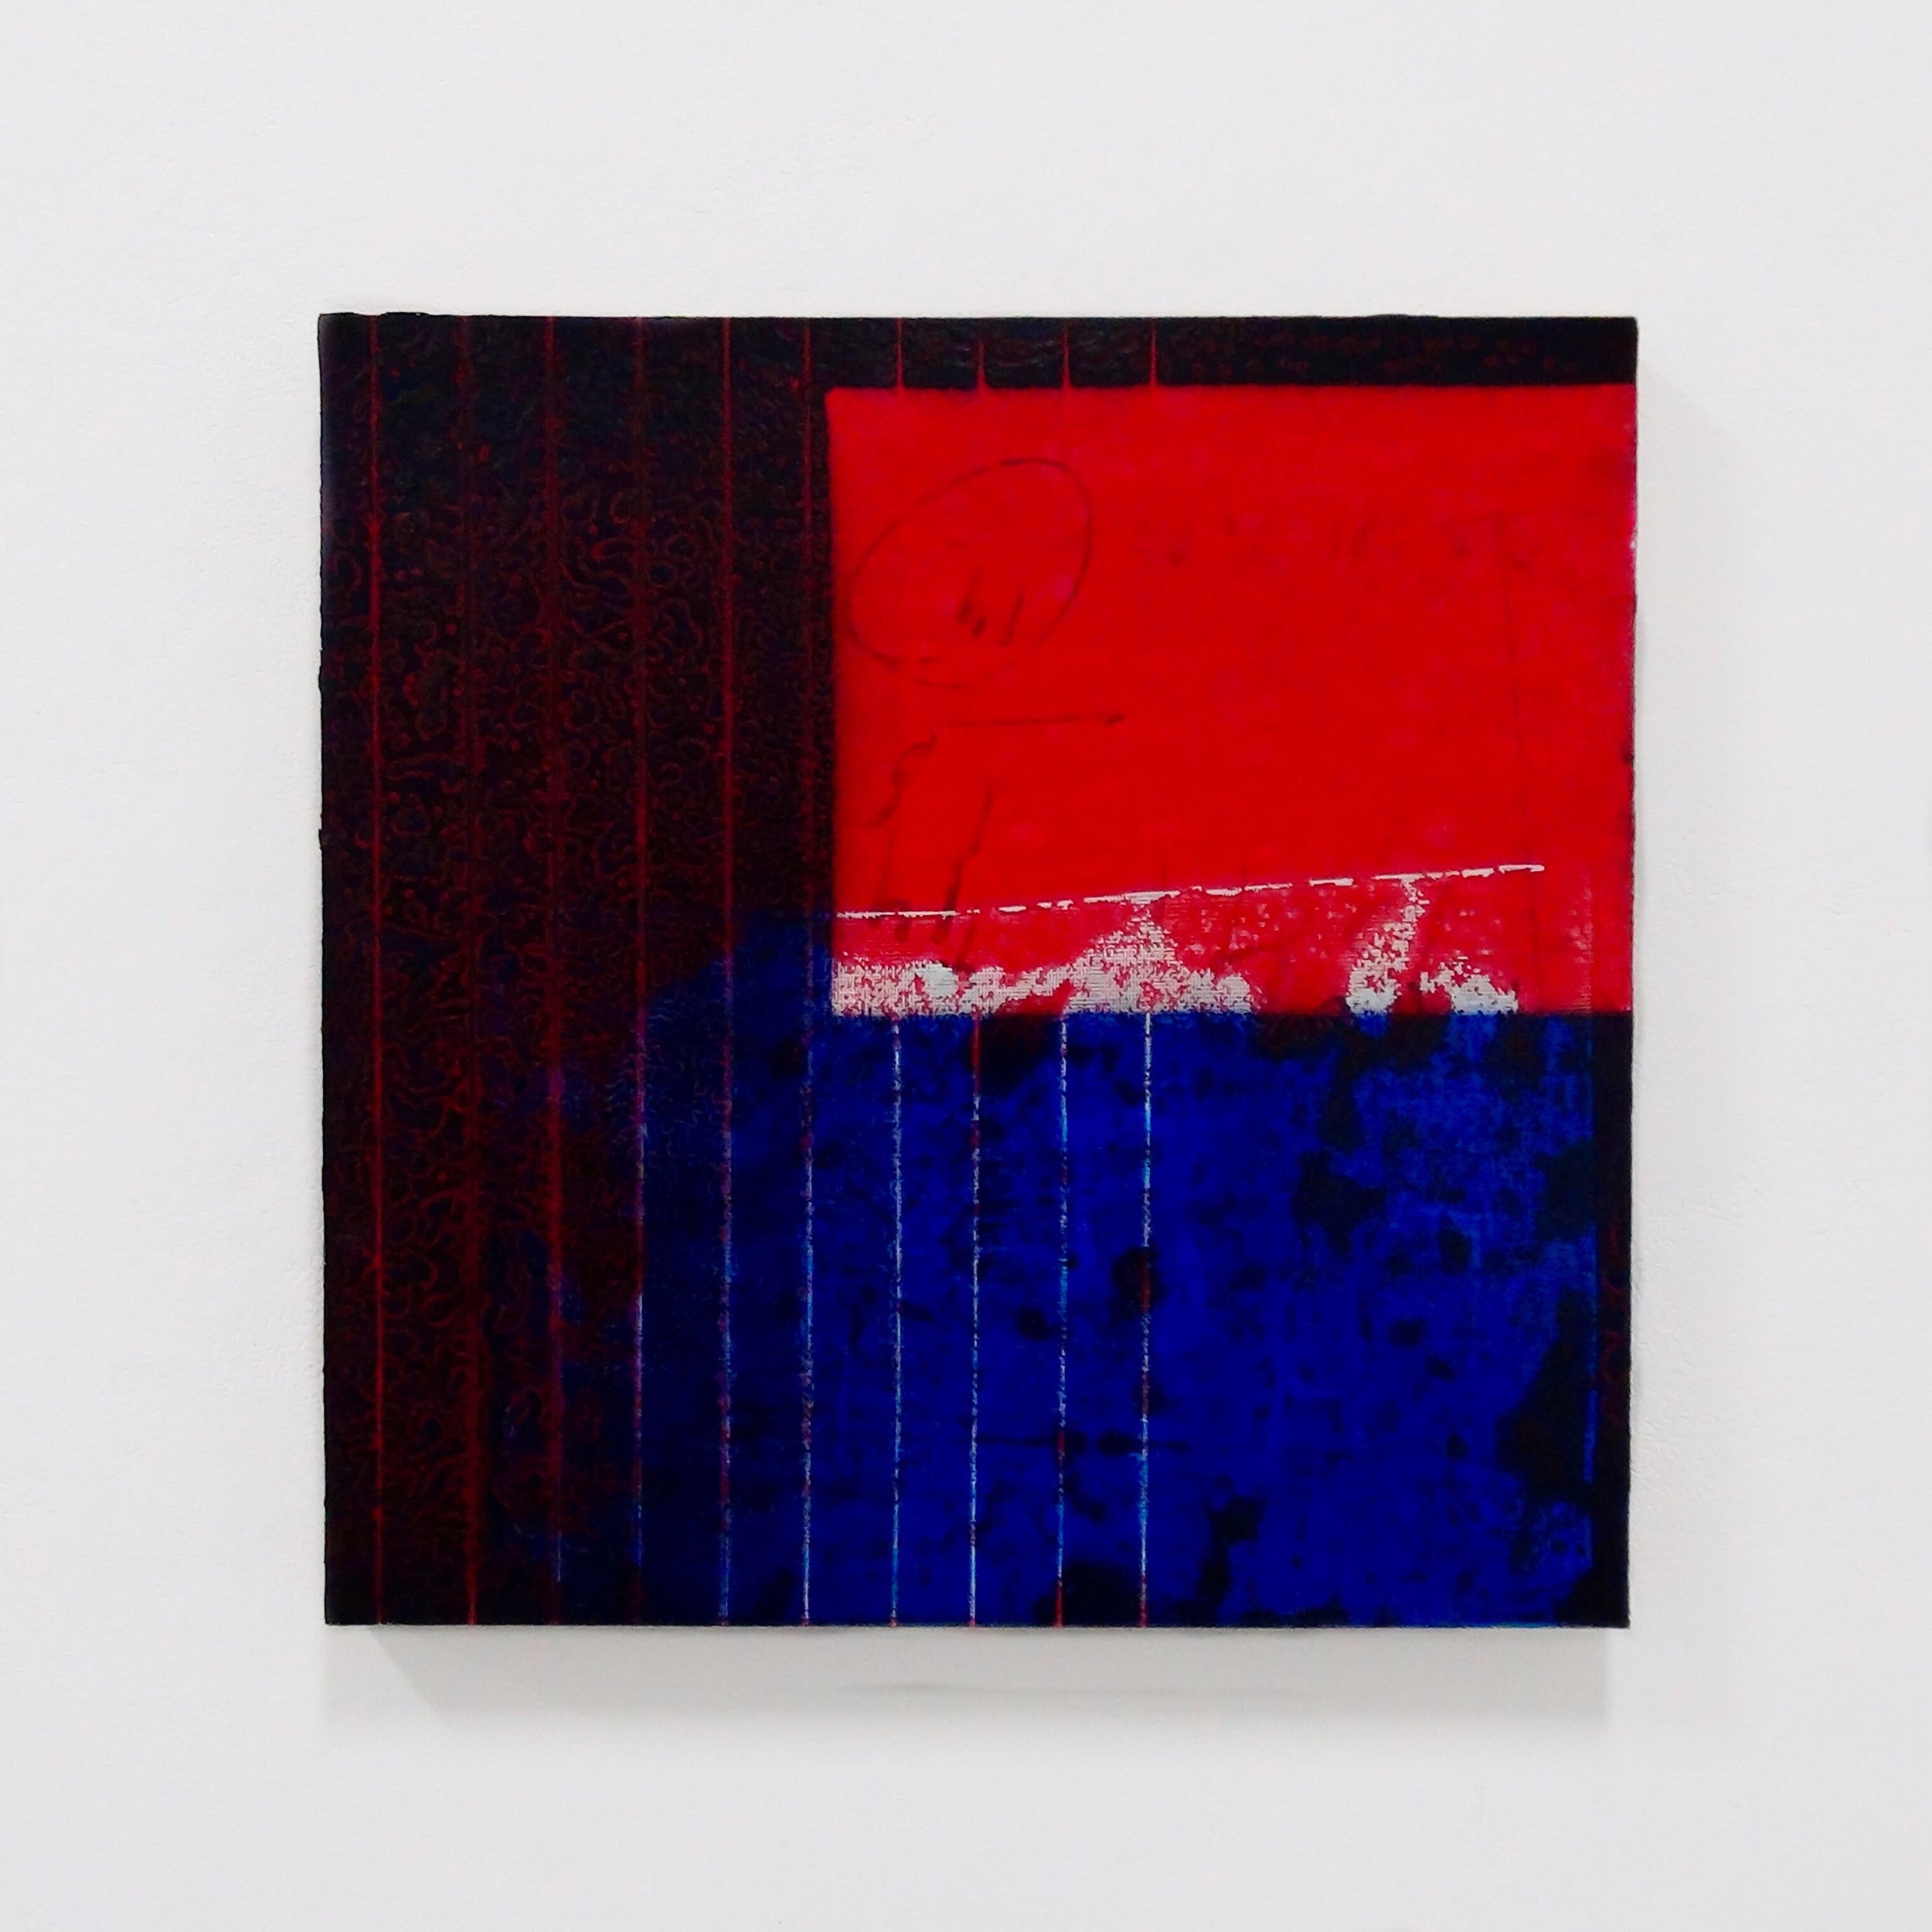  IAIN MUIRHEAD   1512  , 2015. Oil, airborne pigment, and acrylic binder on canvas. 23 x 23 inches. 